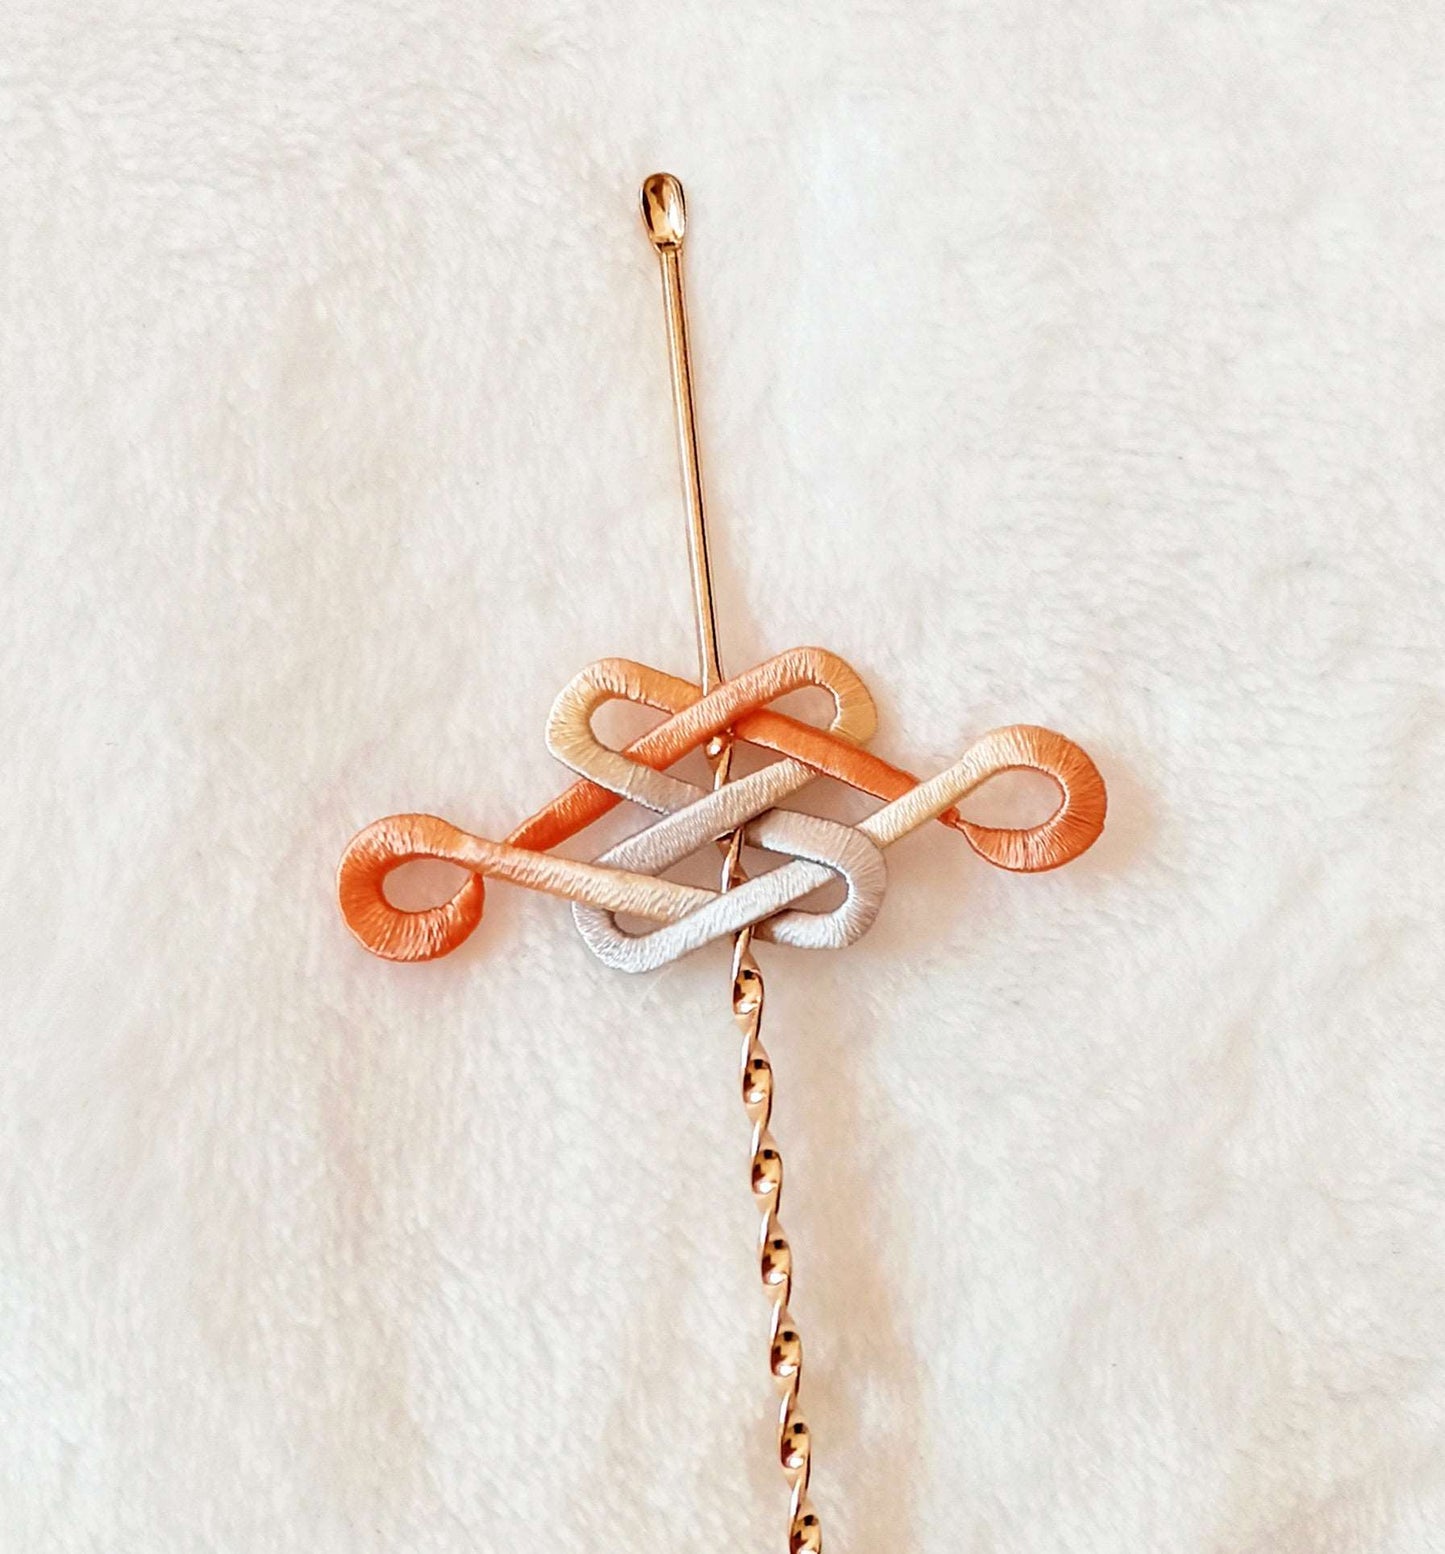 Delicate Chinese Knot Hairpin